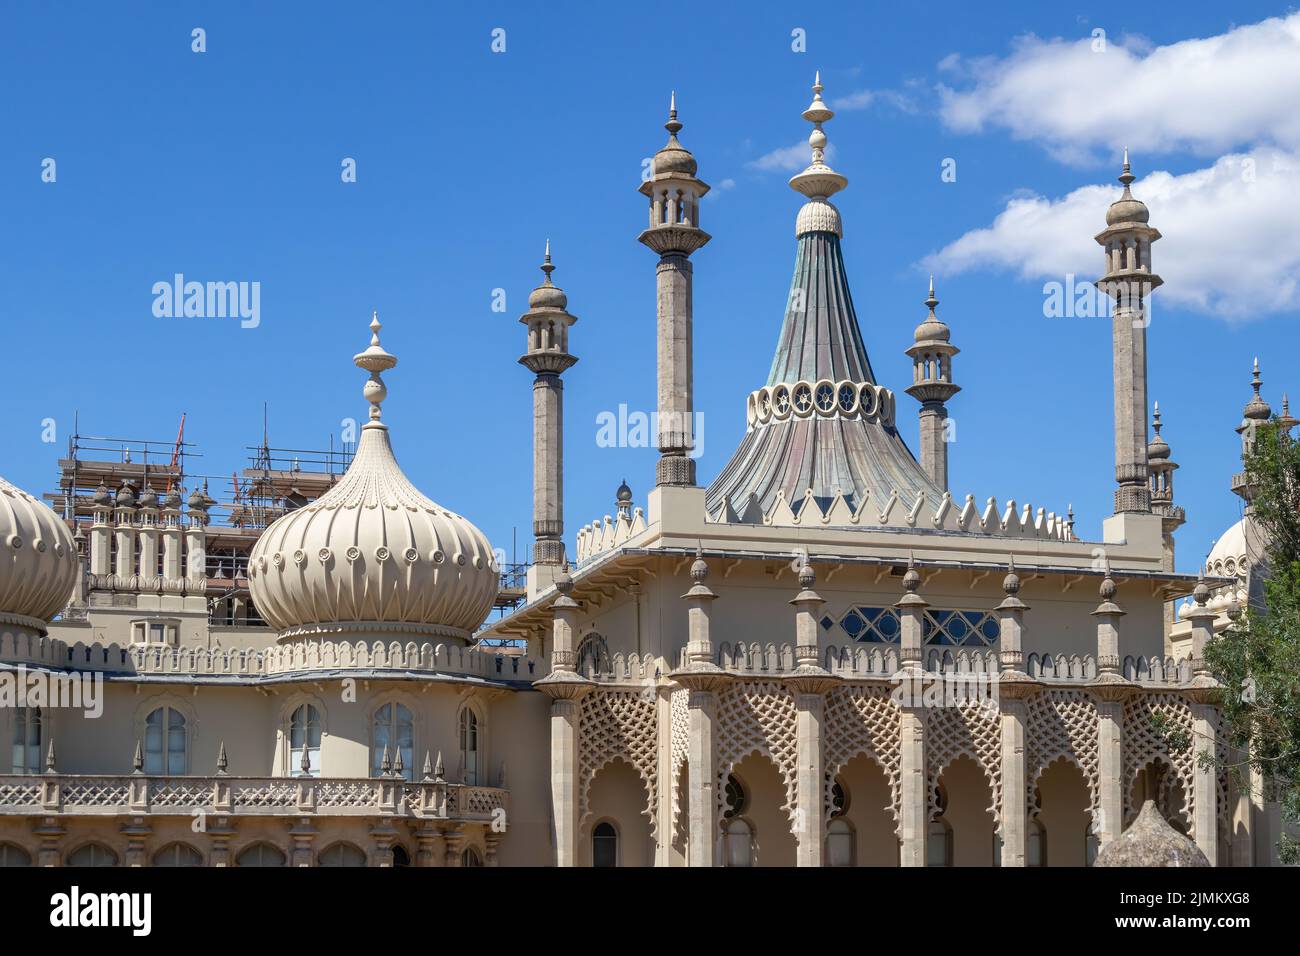 BRIGHTON, SUSSEX, UK - AUGUST 5 : View of the Royal Pavilion in Brighton Sussex on August 5, 2022 Stock Photo